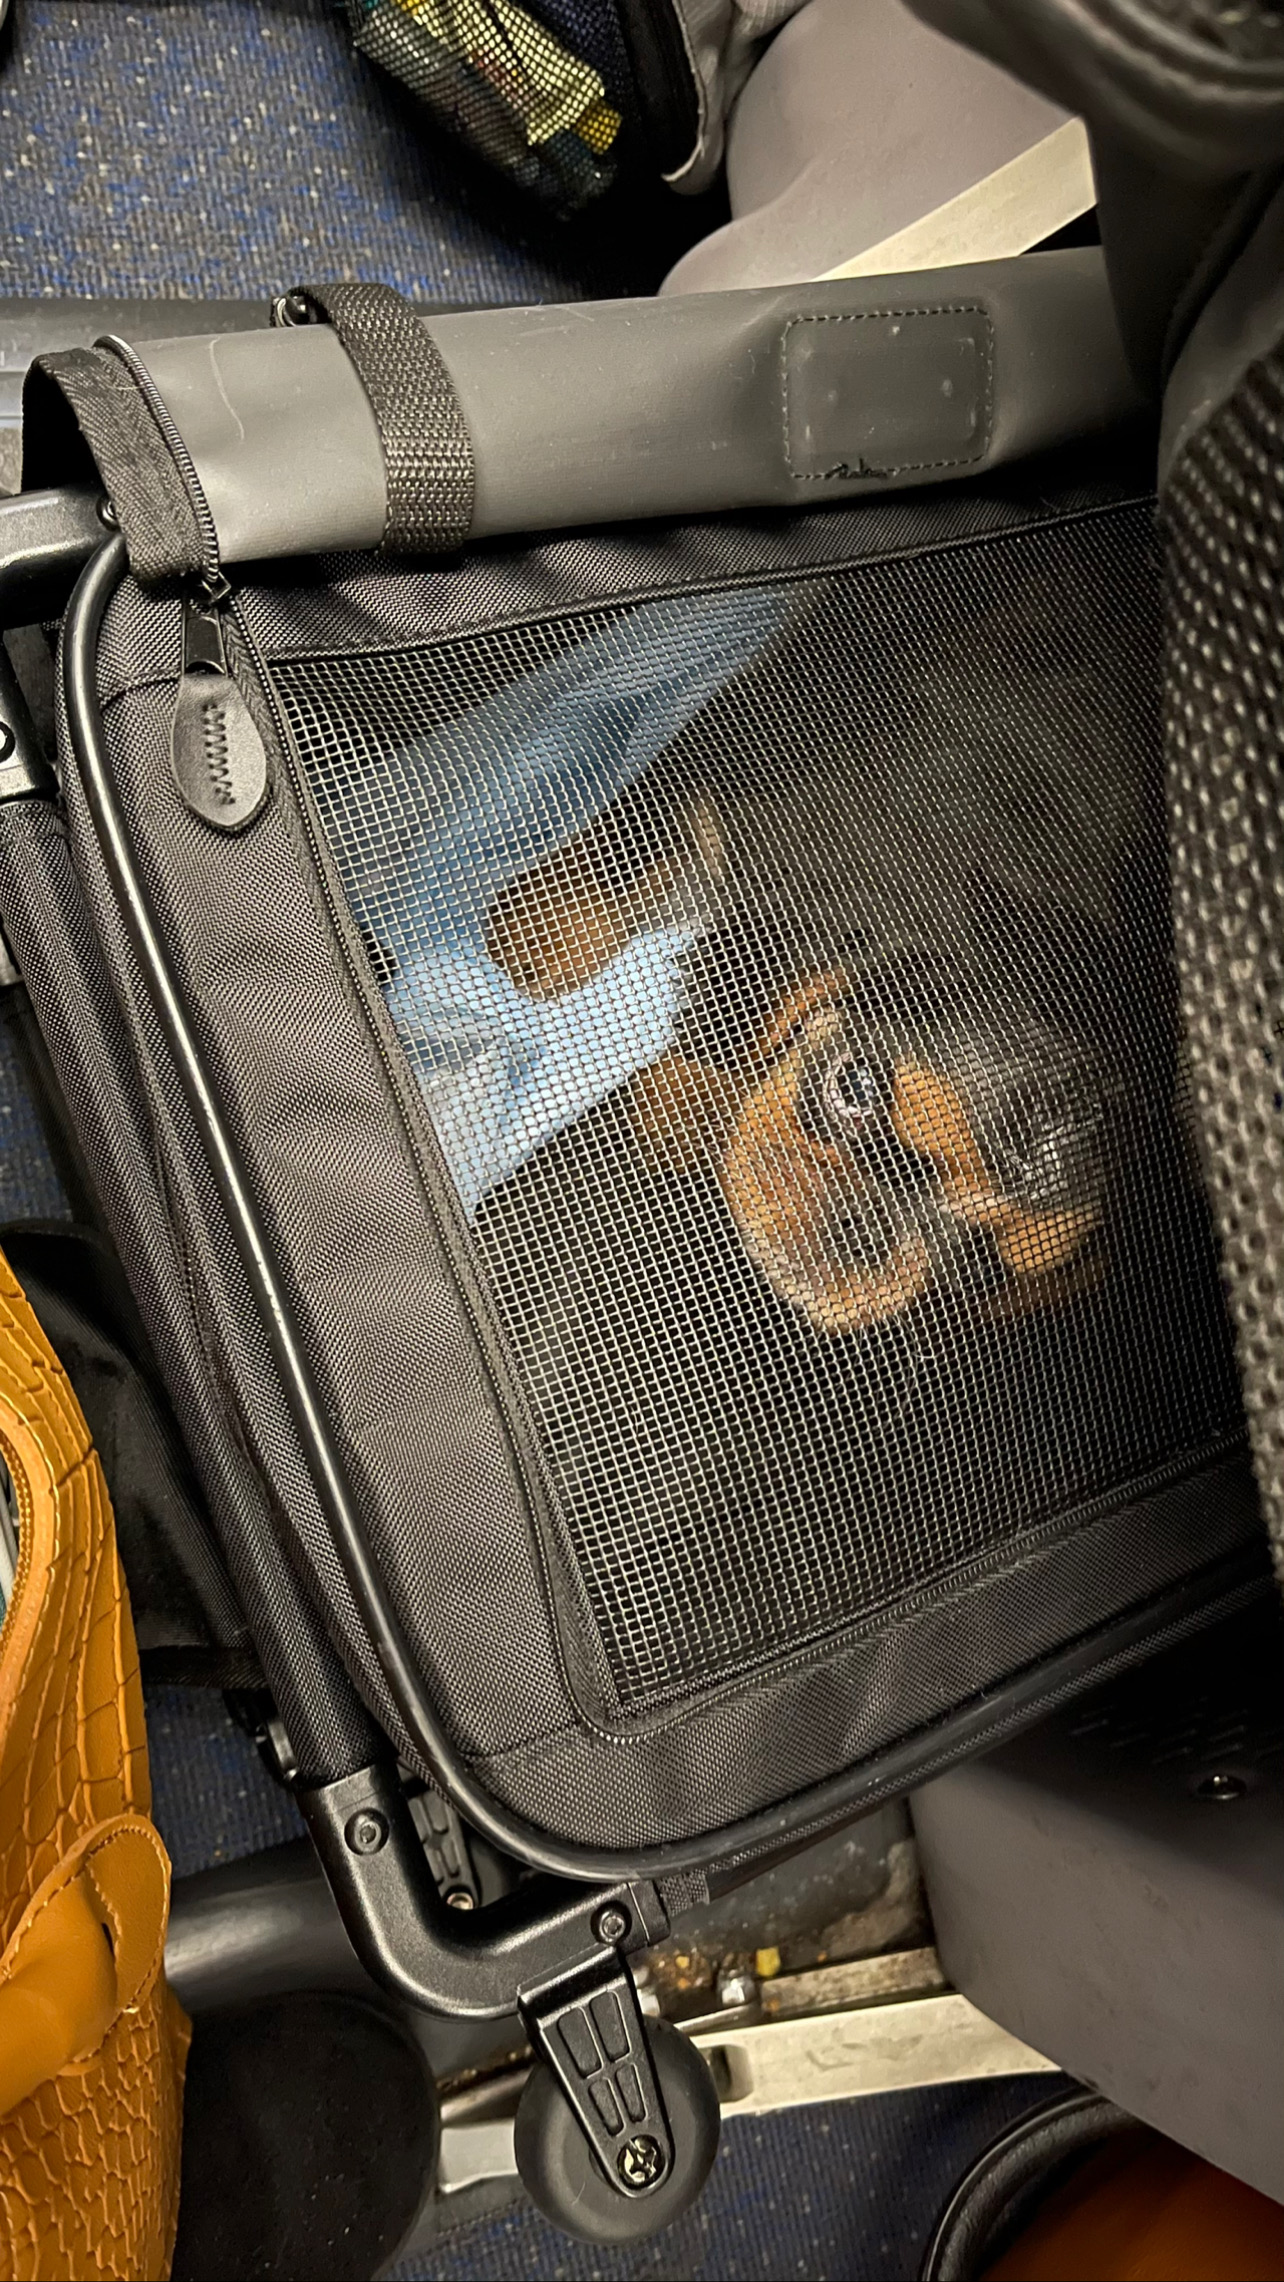 Flight Pet Nanny transporting an English Toy Spaniel from Florida to New York